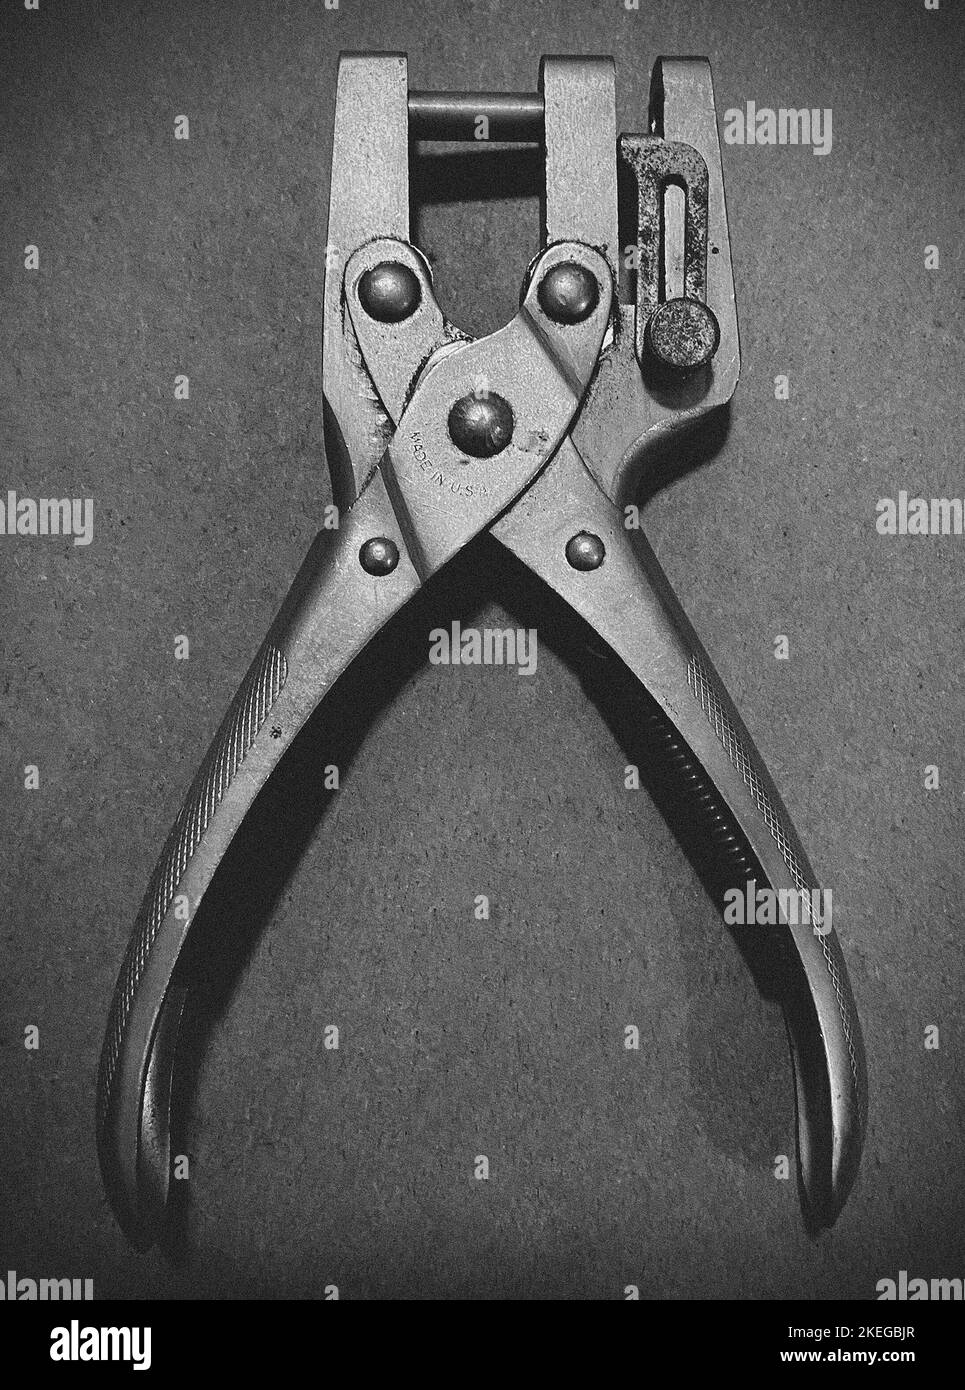 Vintage Metal Hole Puncher Stock Photo